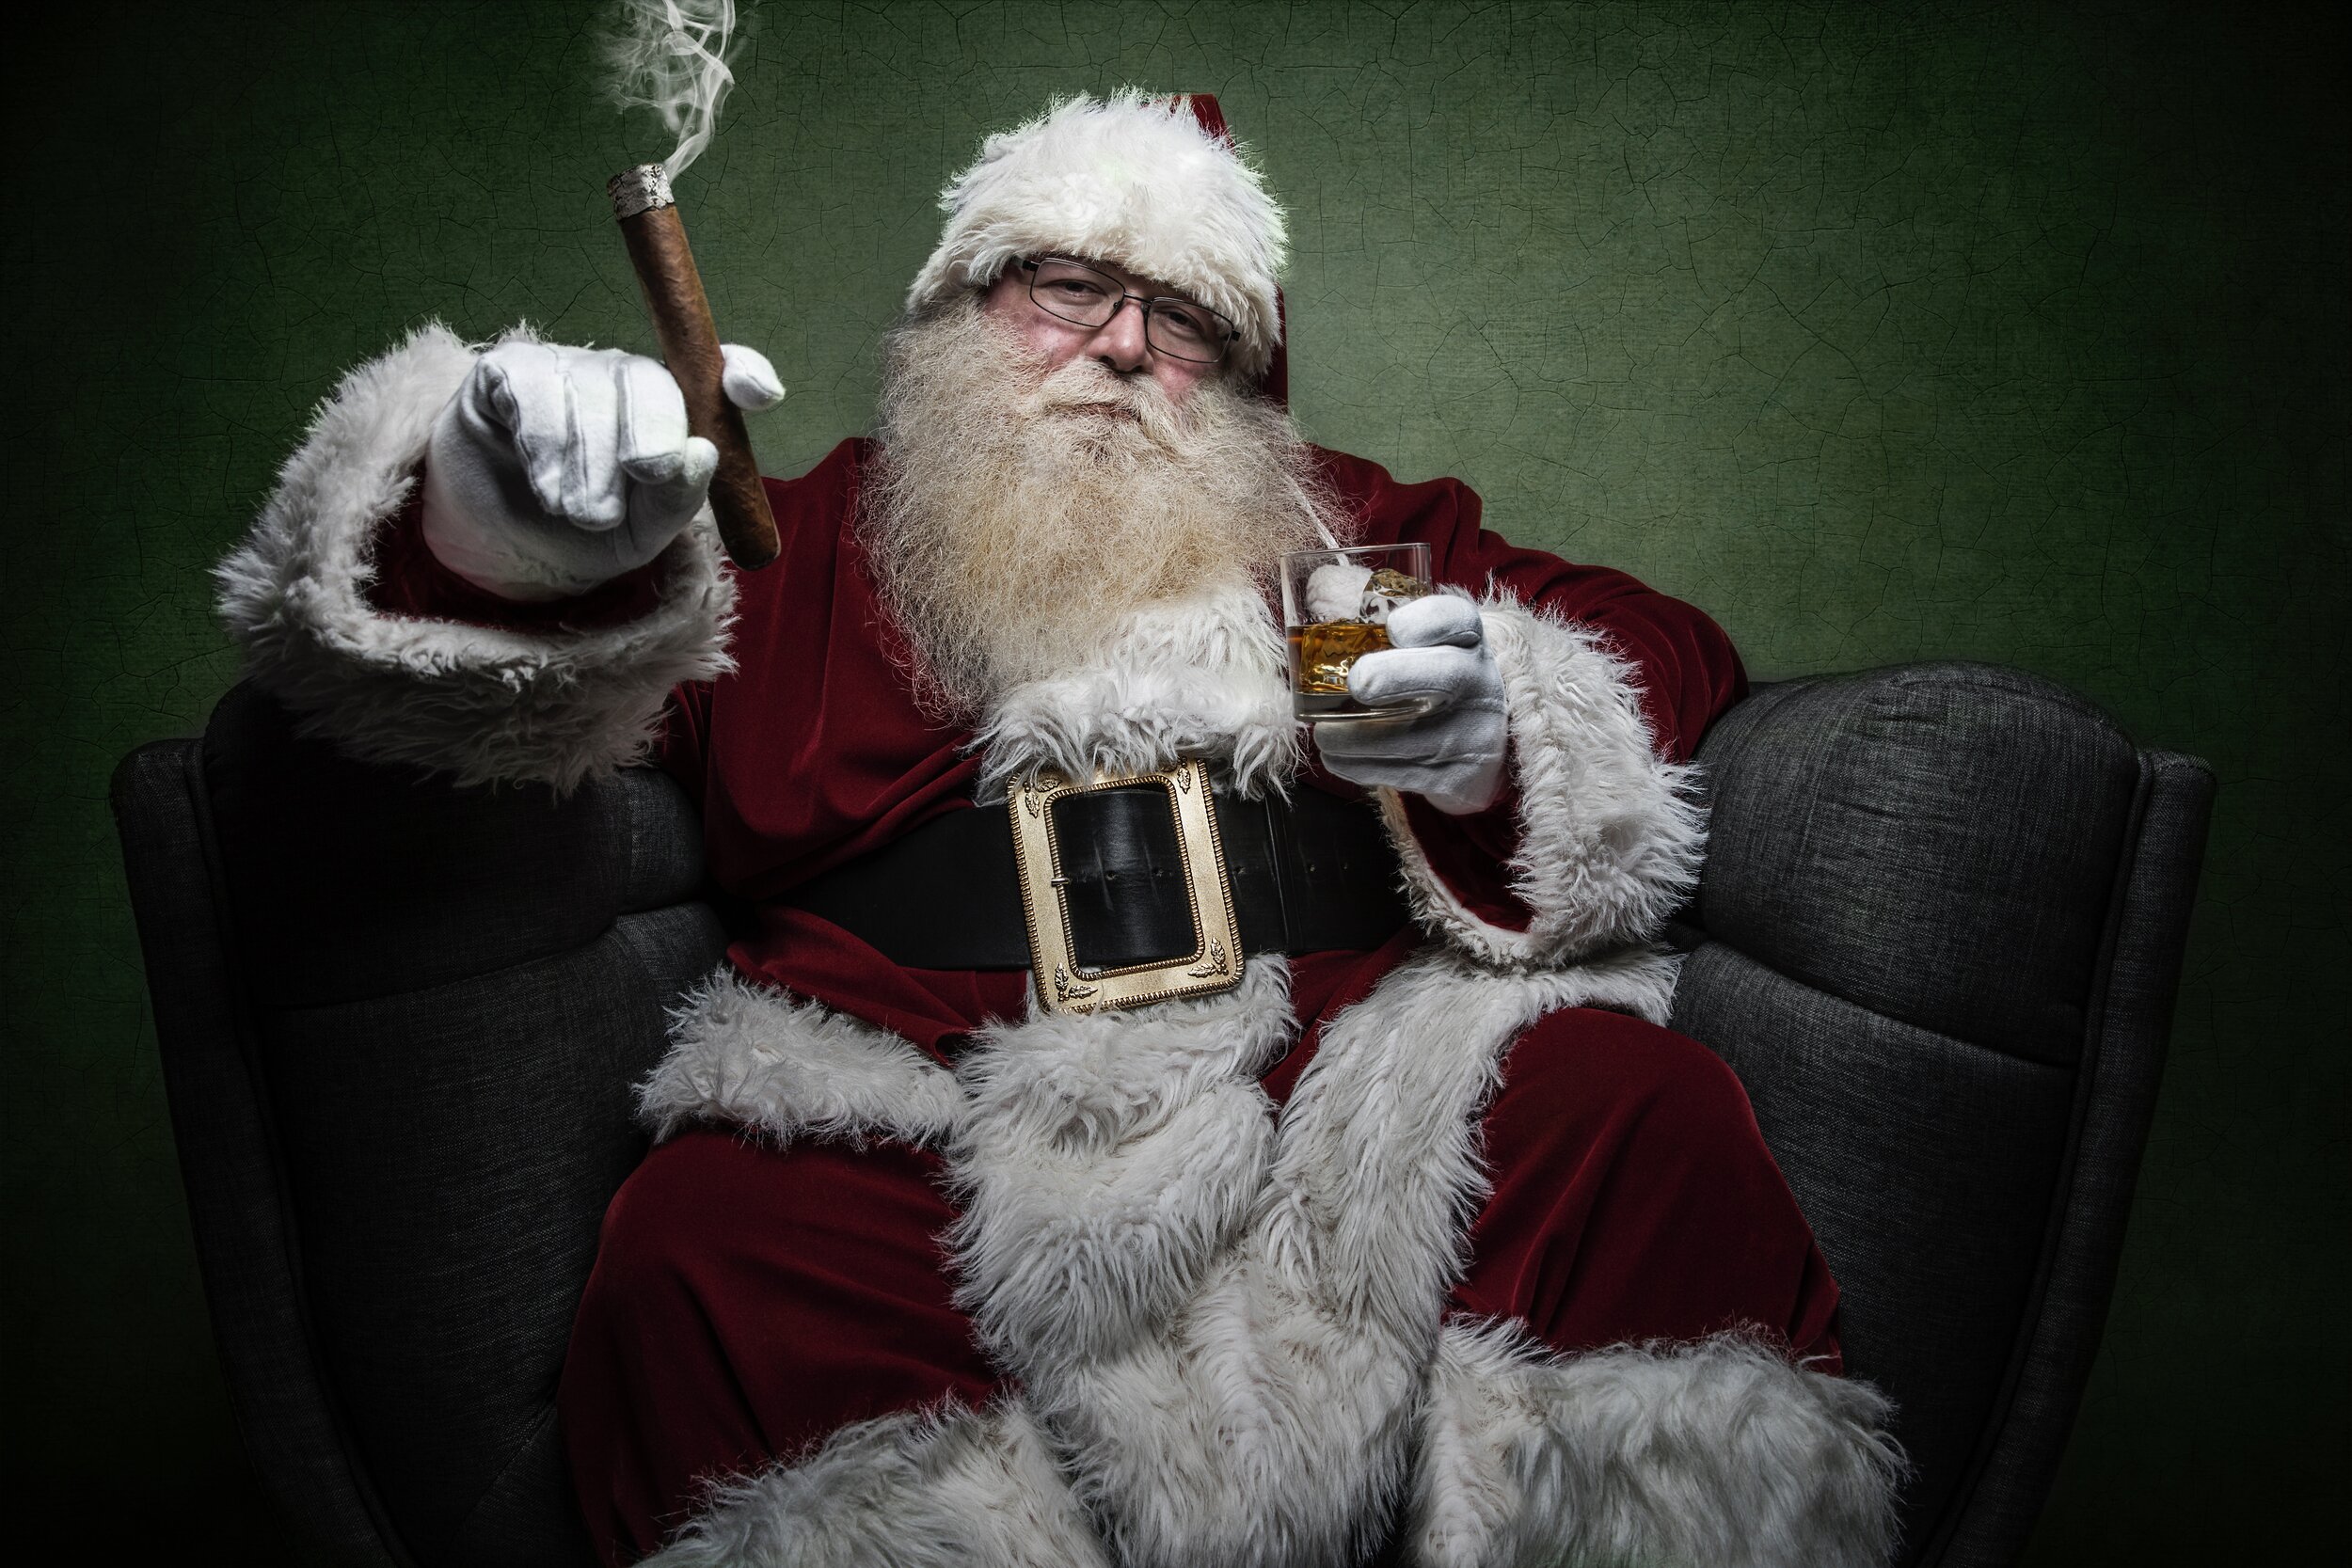 Santa Claus Porn is a Thing—And It’s Very Popular Right Now